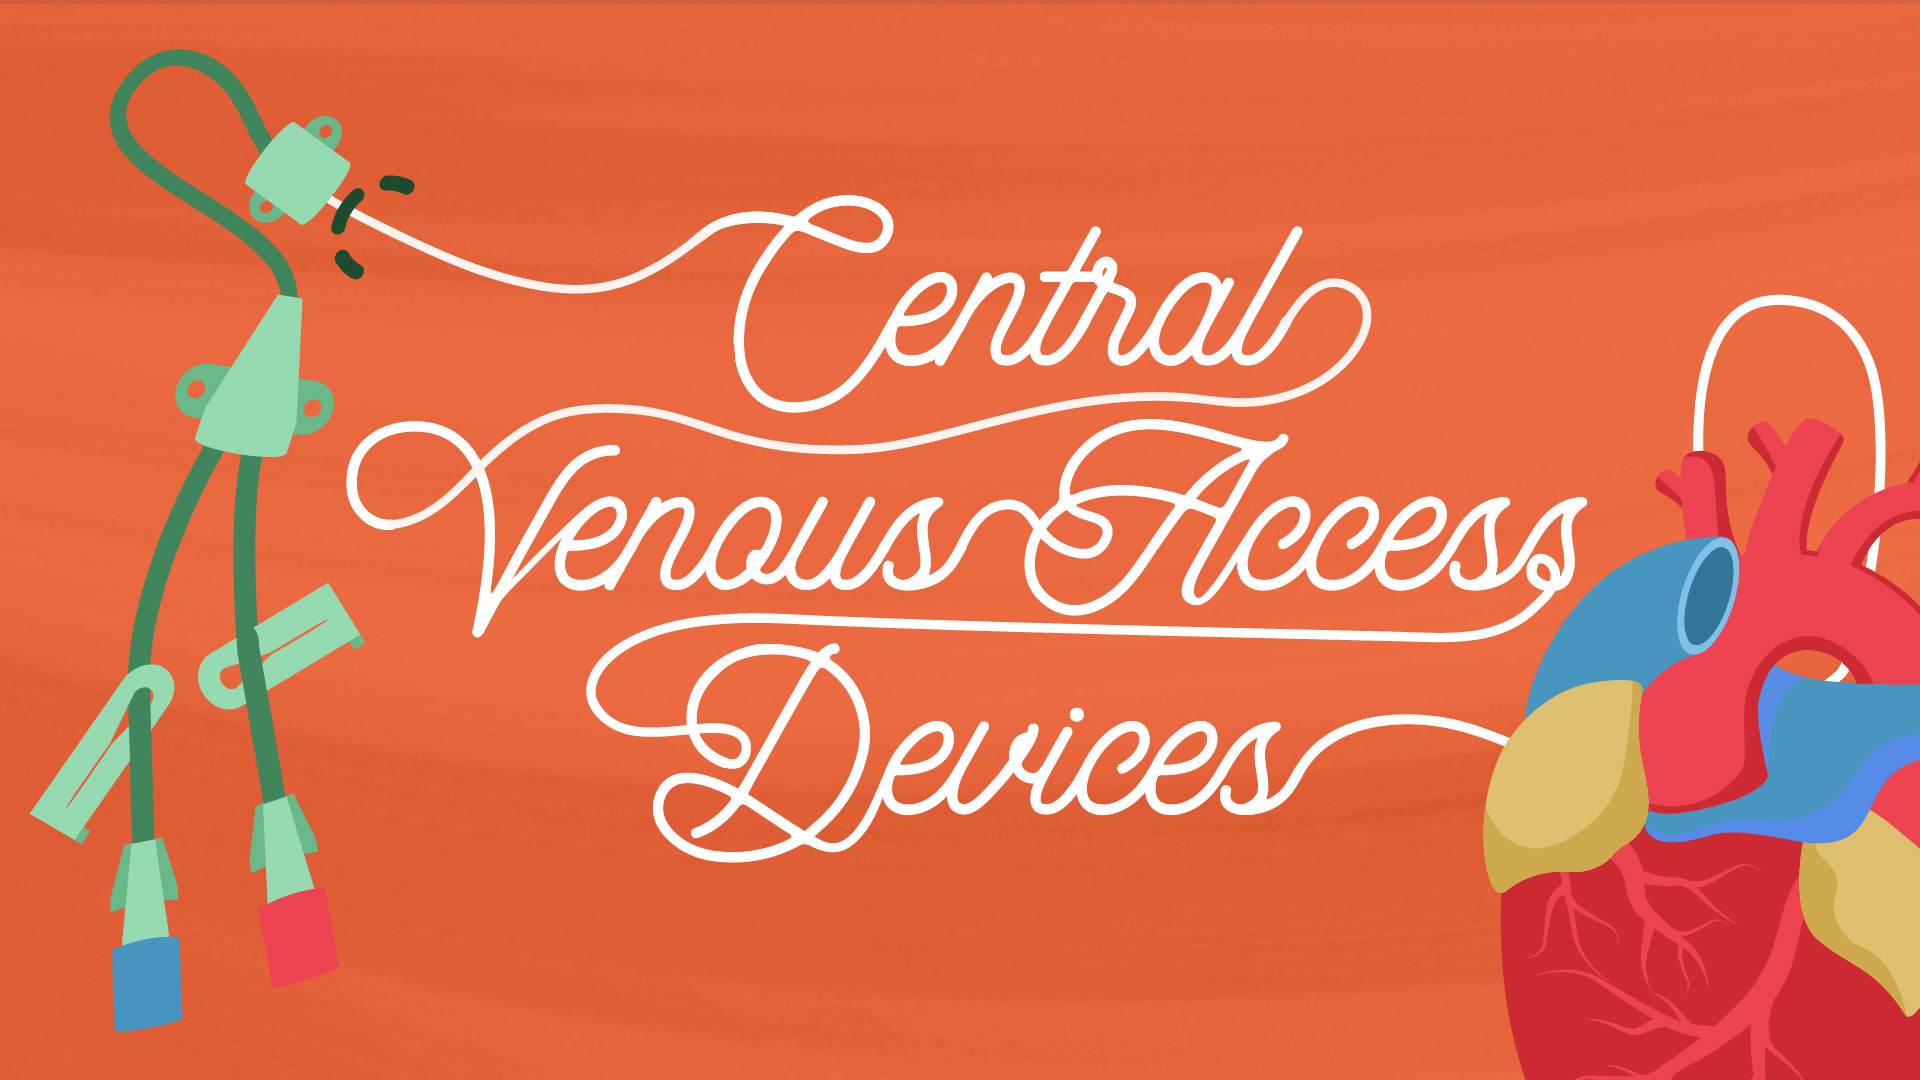 Cover image for: Central Venous Access Devices (CVADs)